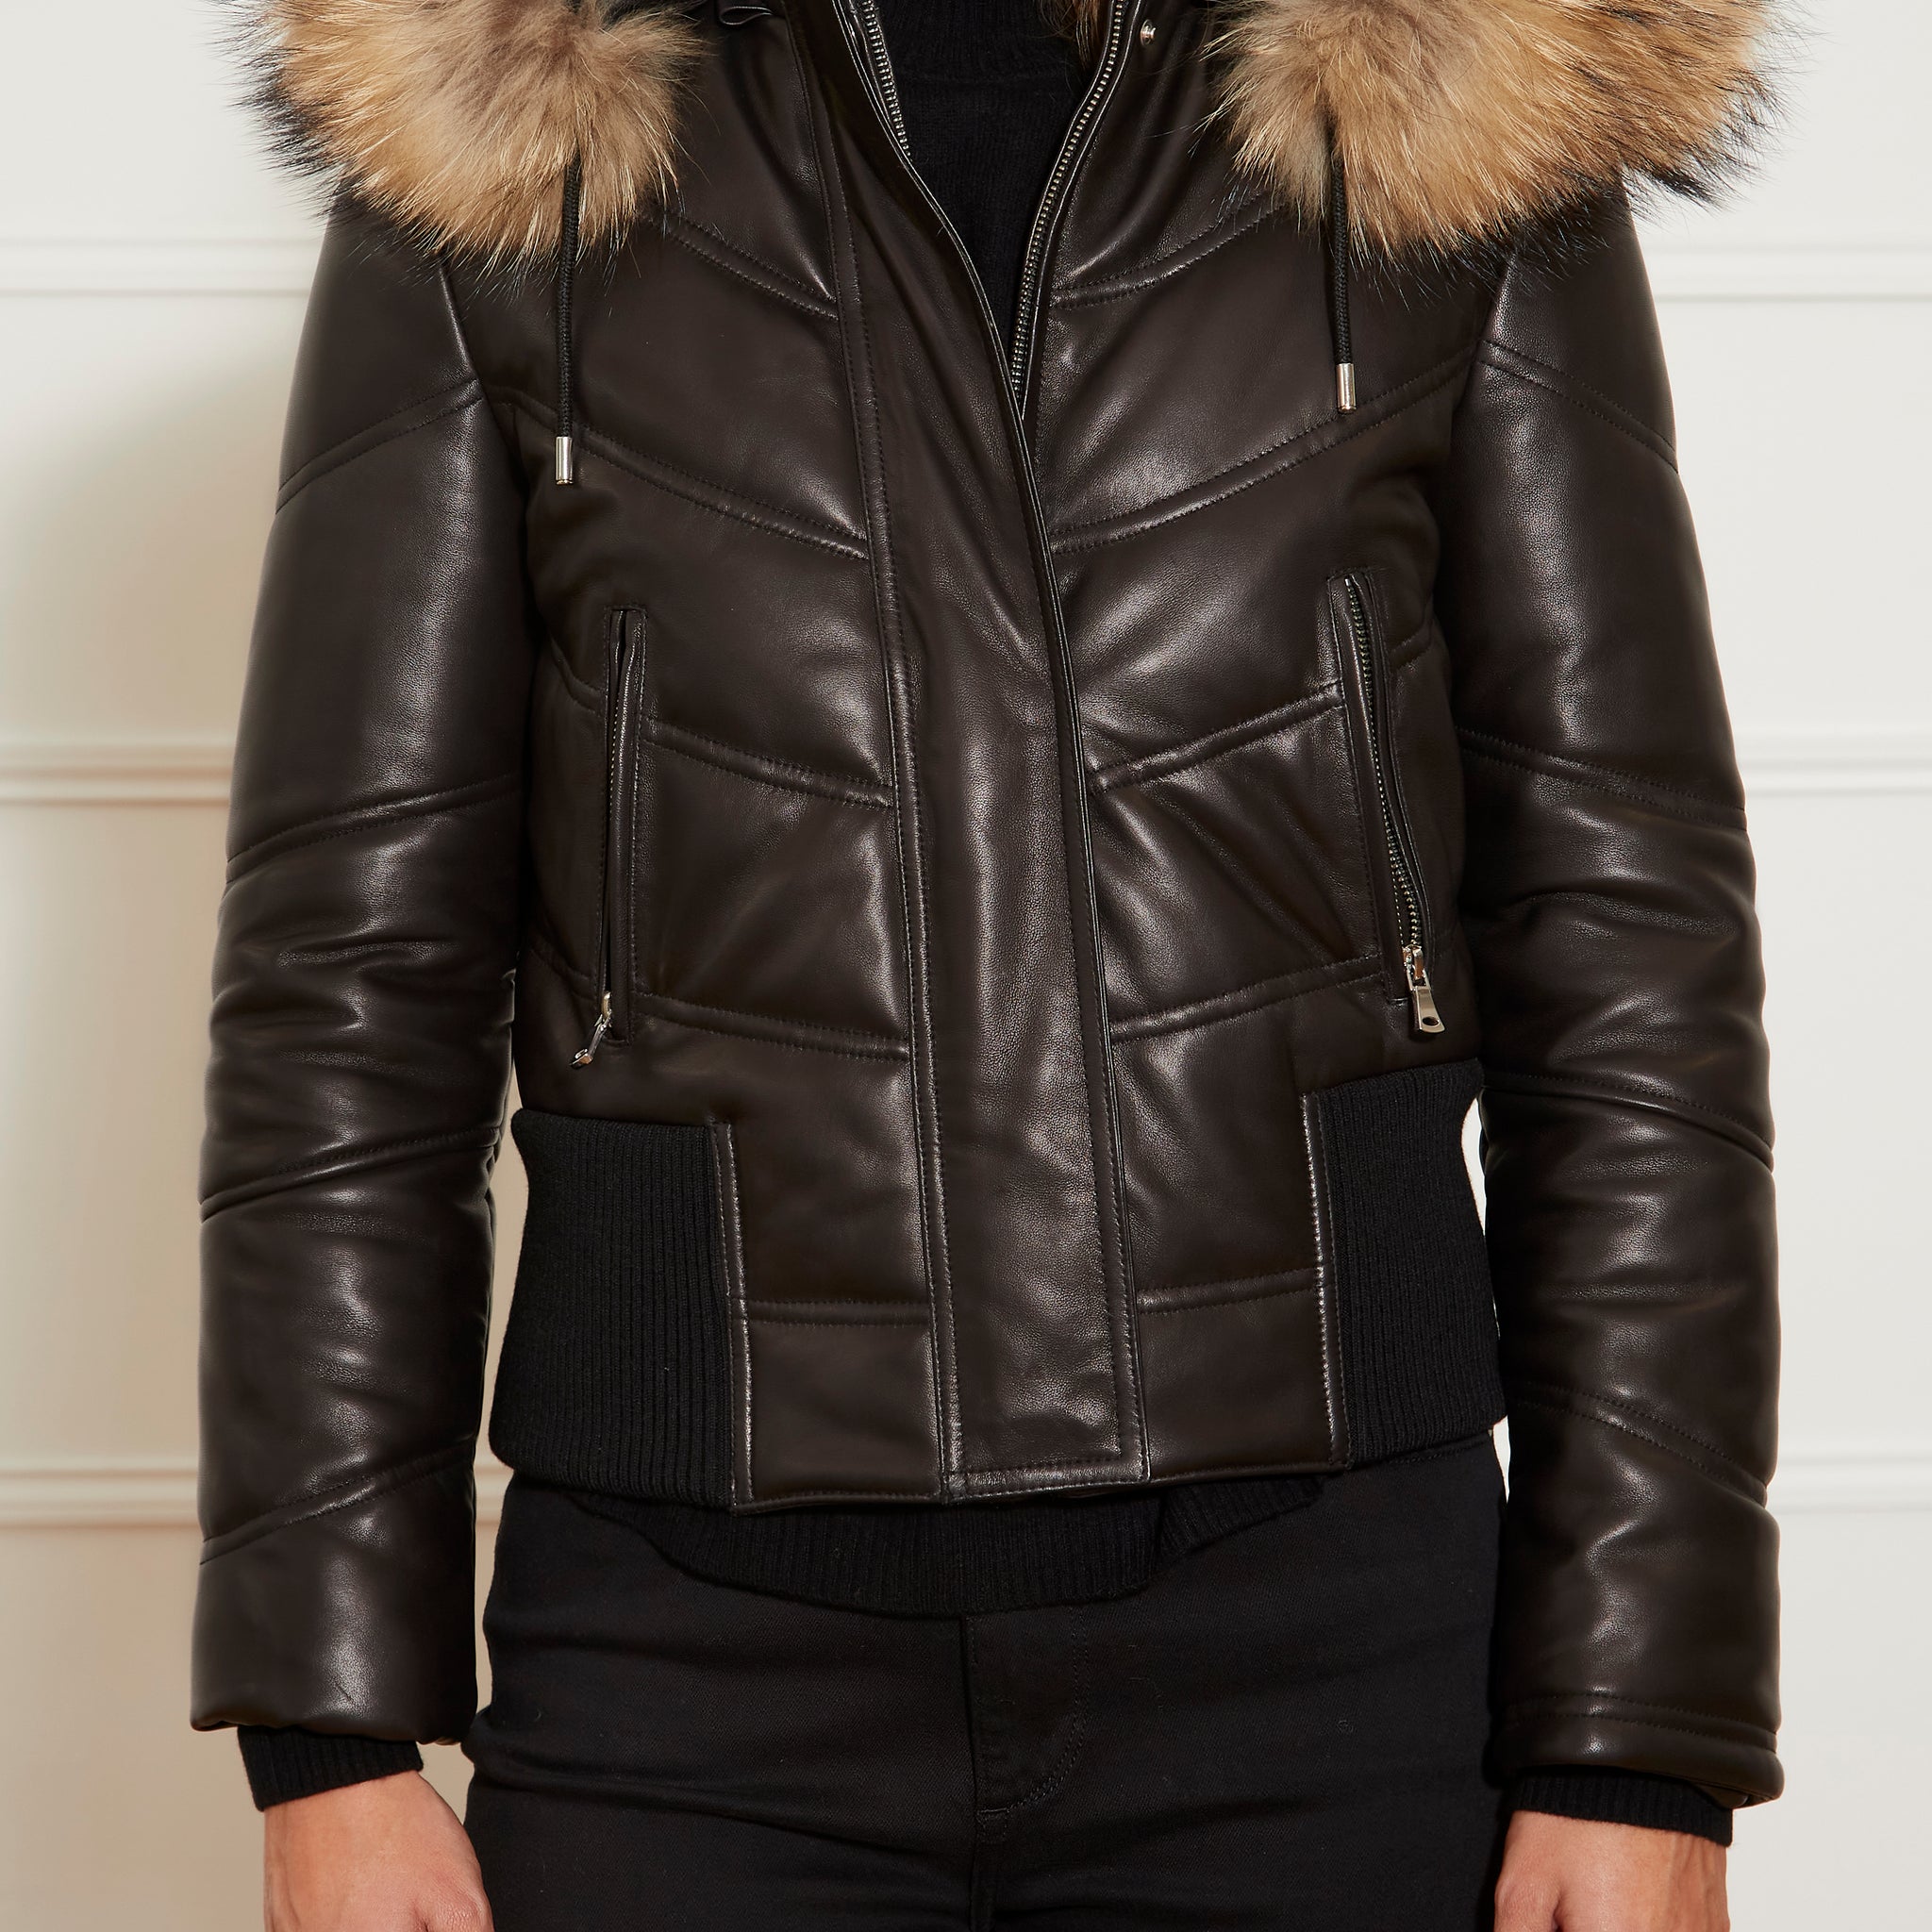 Black Leather Bomber With Fur Trim